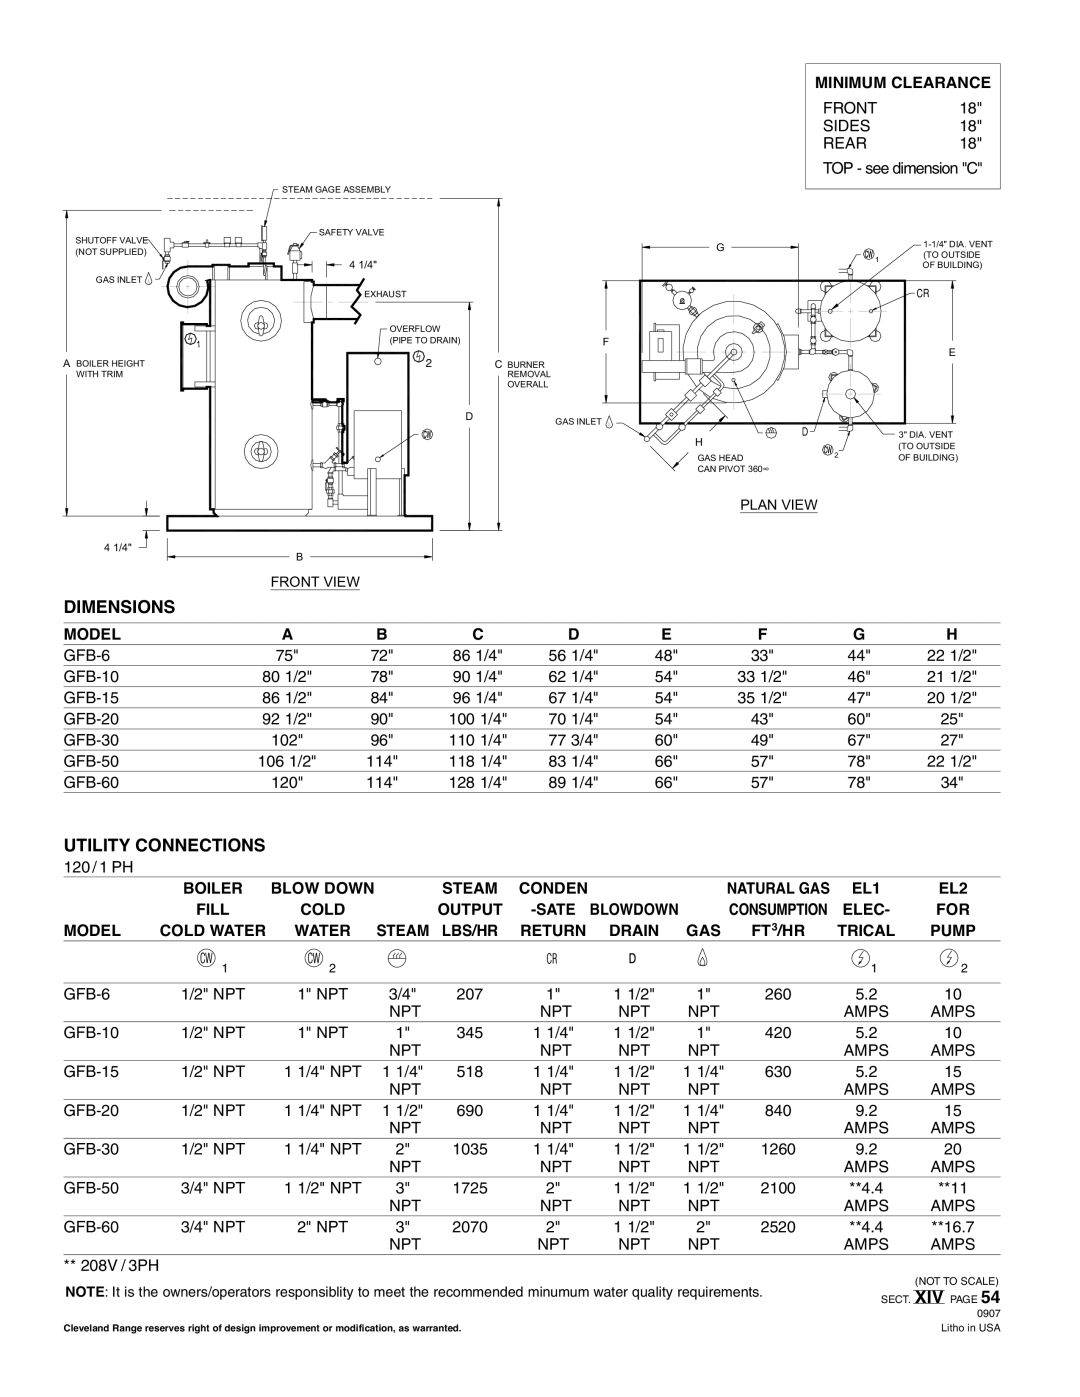 Cleveland Range GFB-15, GFB-60, GFB-50, GFB-20, GFB-30, GFB-10 specifications Dimensions, Utility Connections, Natural Gas 